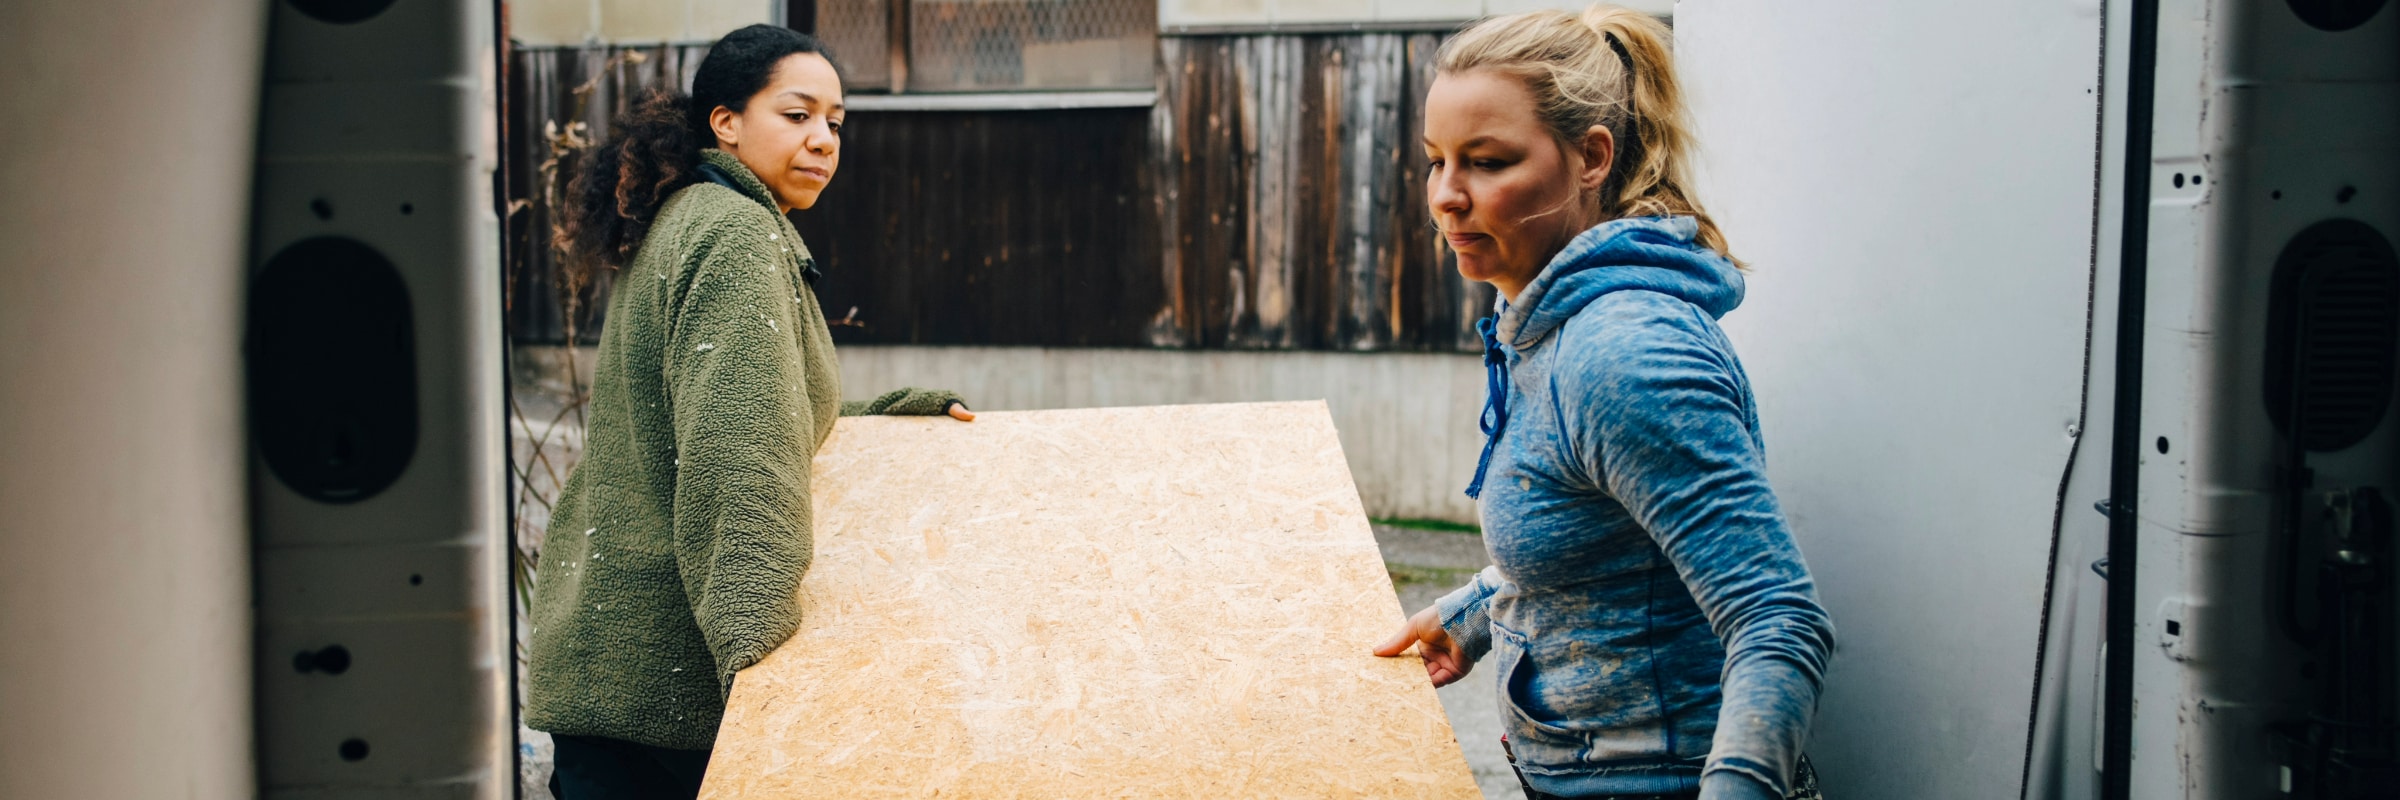 Two female carpenters load a wooden board into the back of a van